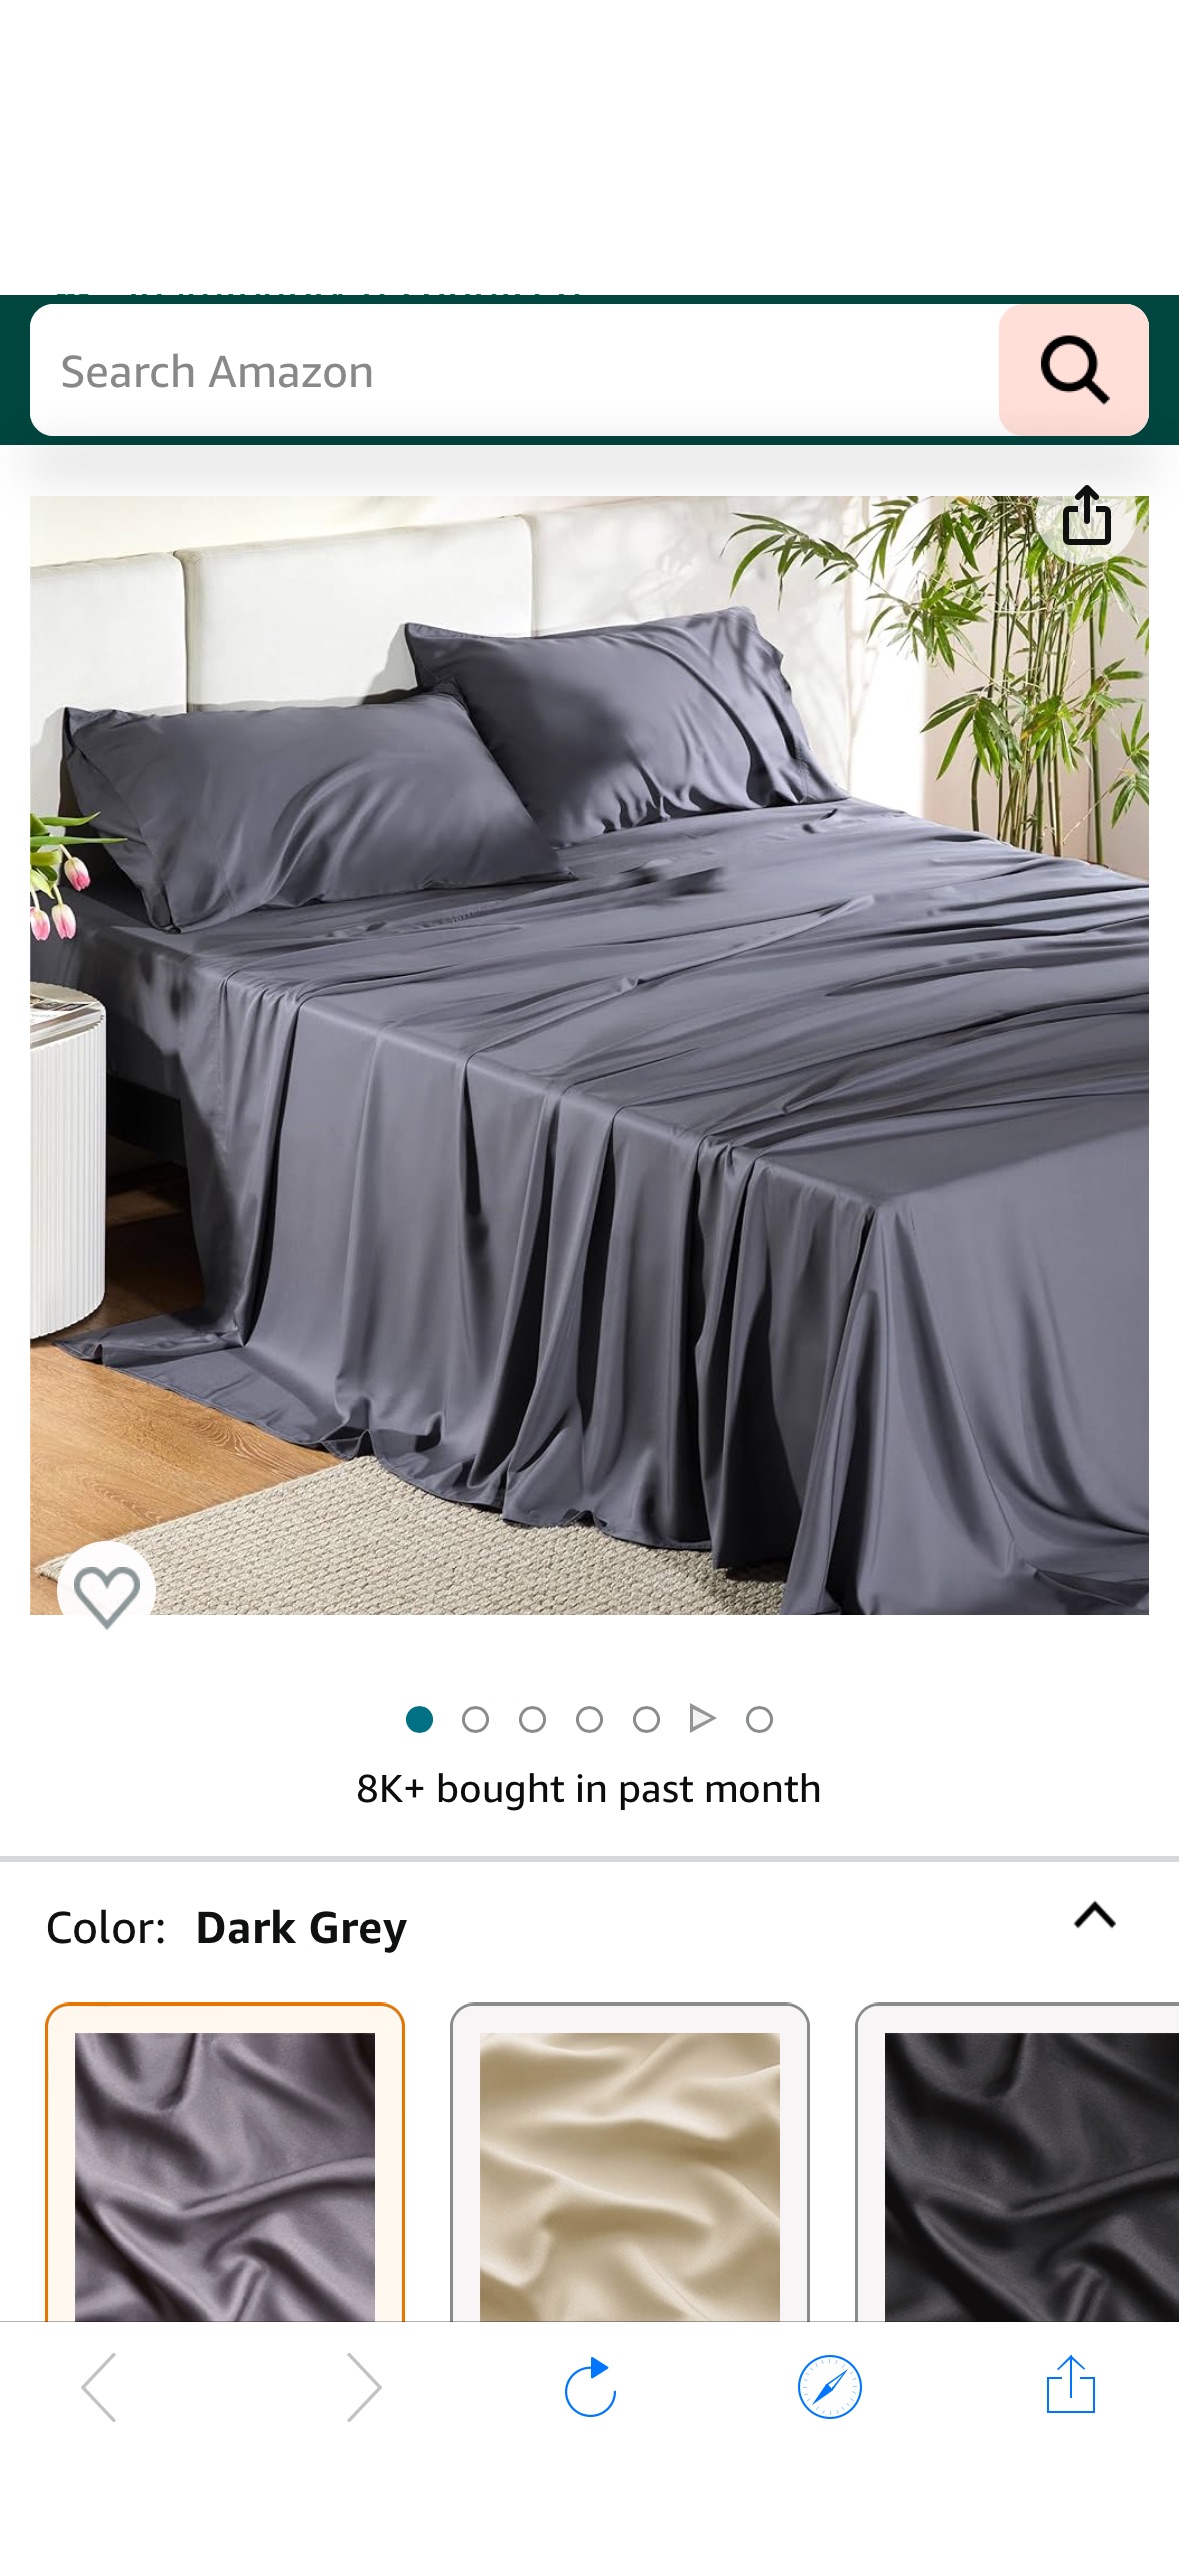 Amazon.com: Bedsure Queen Sheets, Rayon Derived from Bamboo, Queen Cooling Sheet Set, Deep Pocket Up to 16", Breathable & Soft Bed Sheets, Hotel Luxury Silky Bedding Sheets & Pillowcases, Dark Grey : 